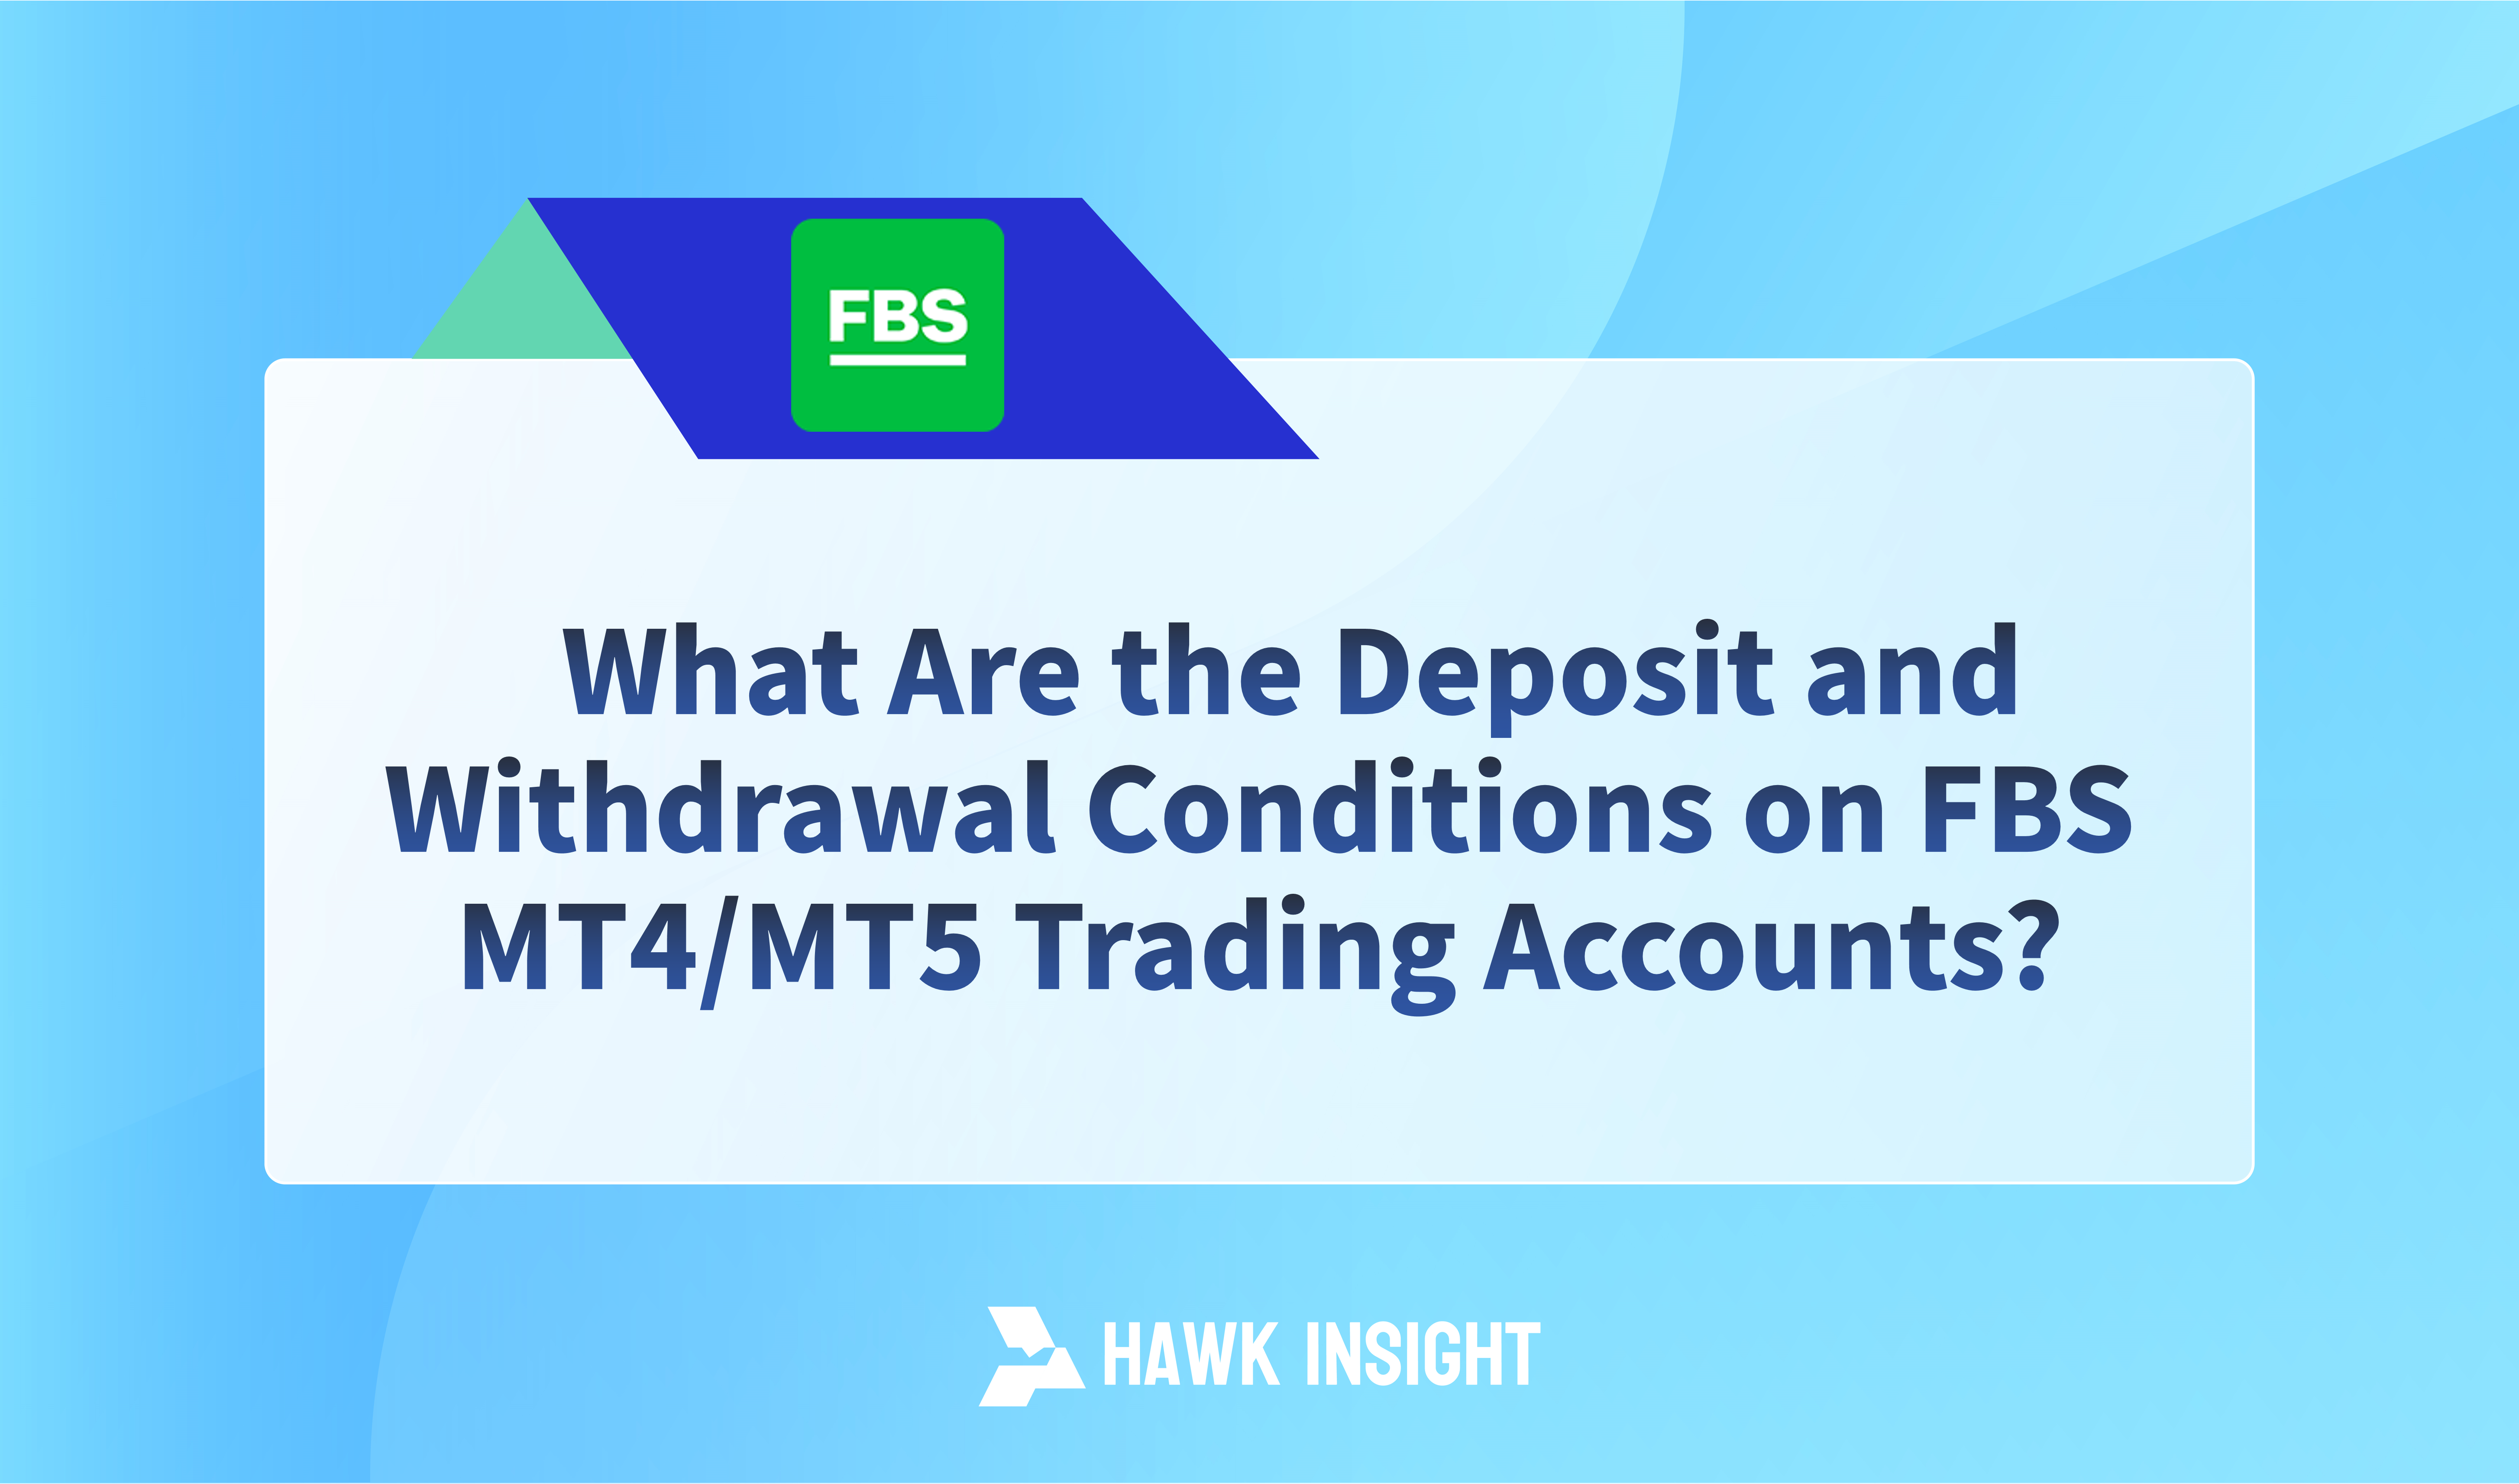 What Are the Deposit and Withdrawal Conditions on FBS MT4/MT5 Trading Accounts?